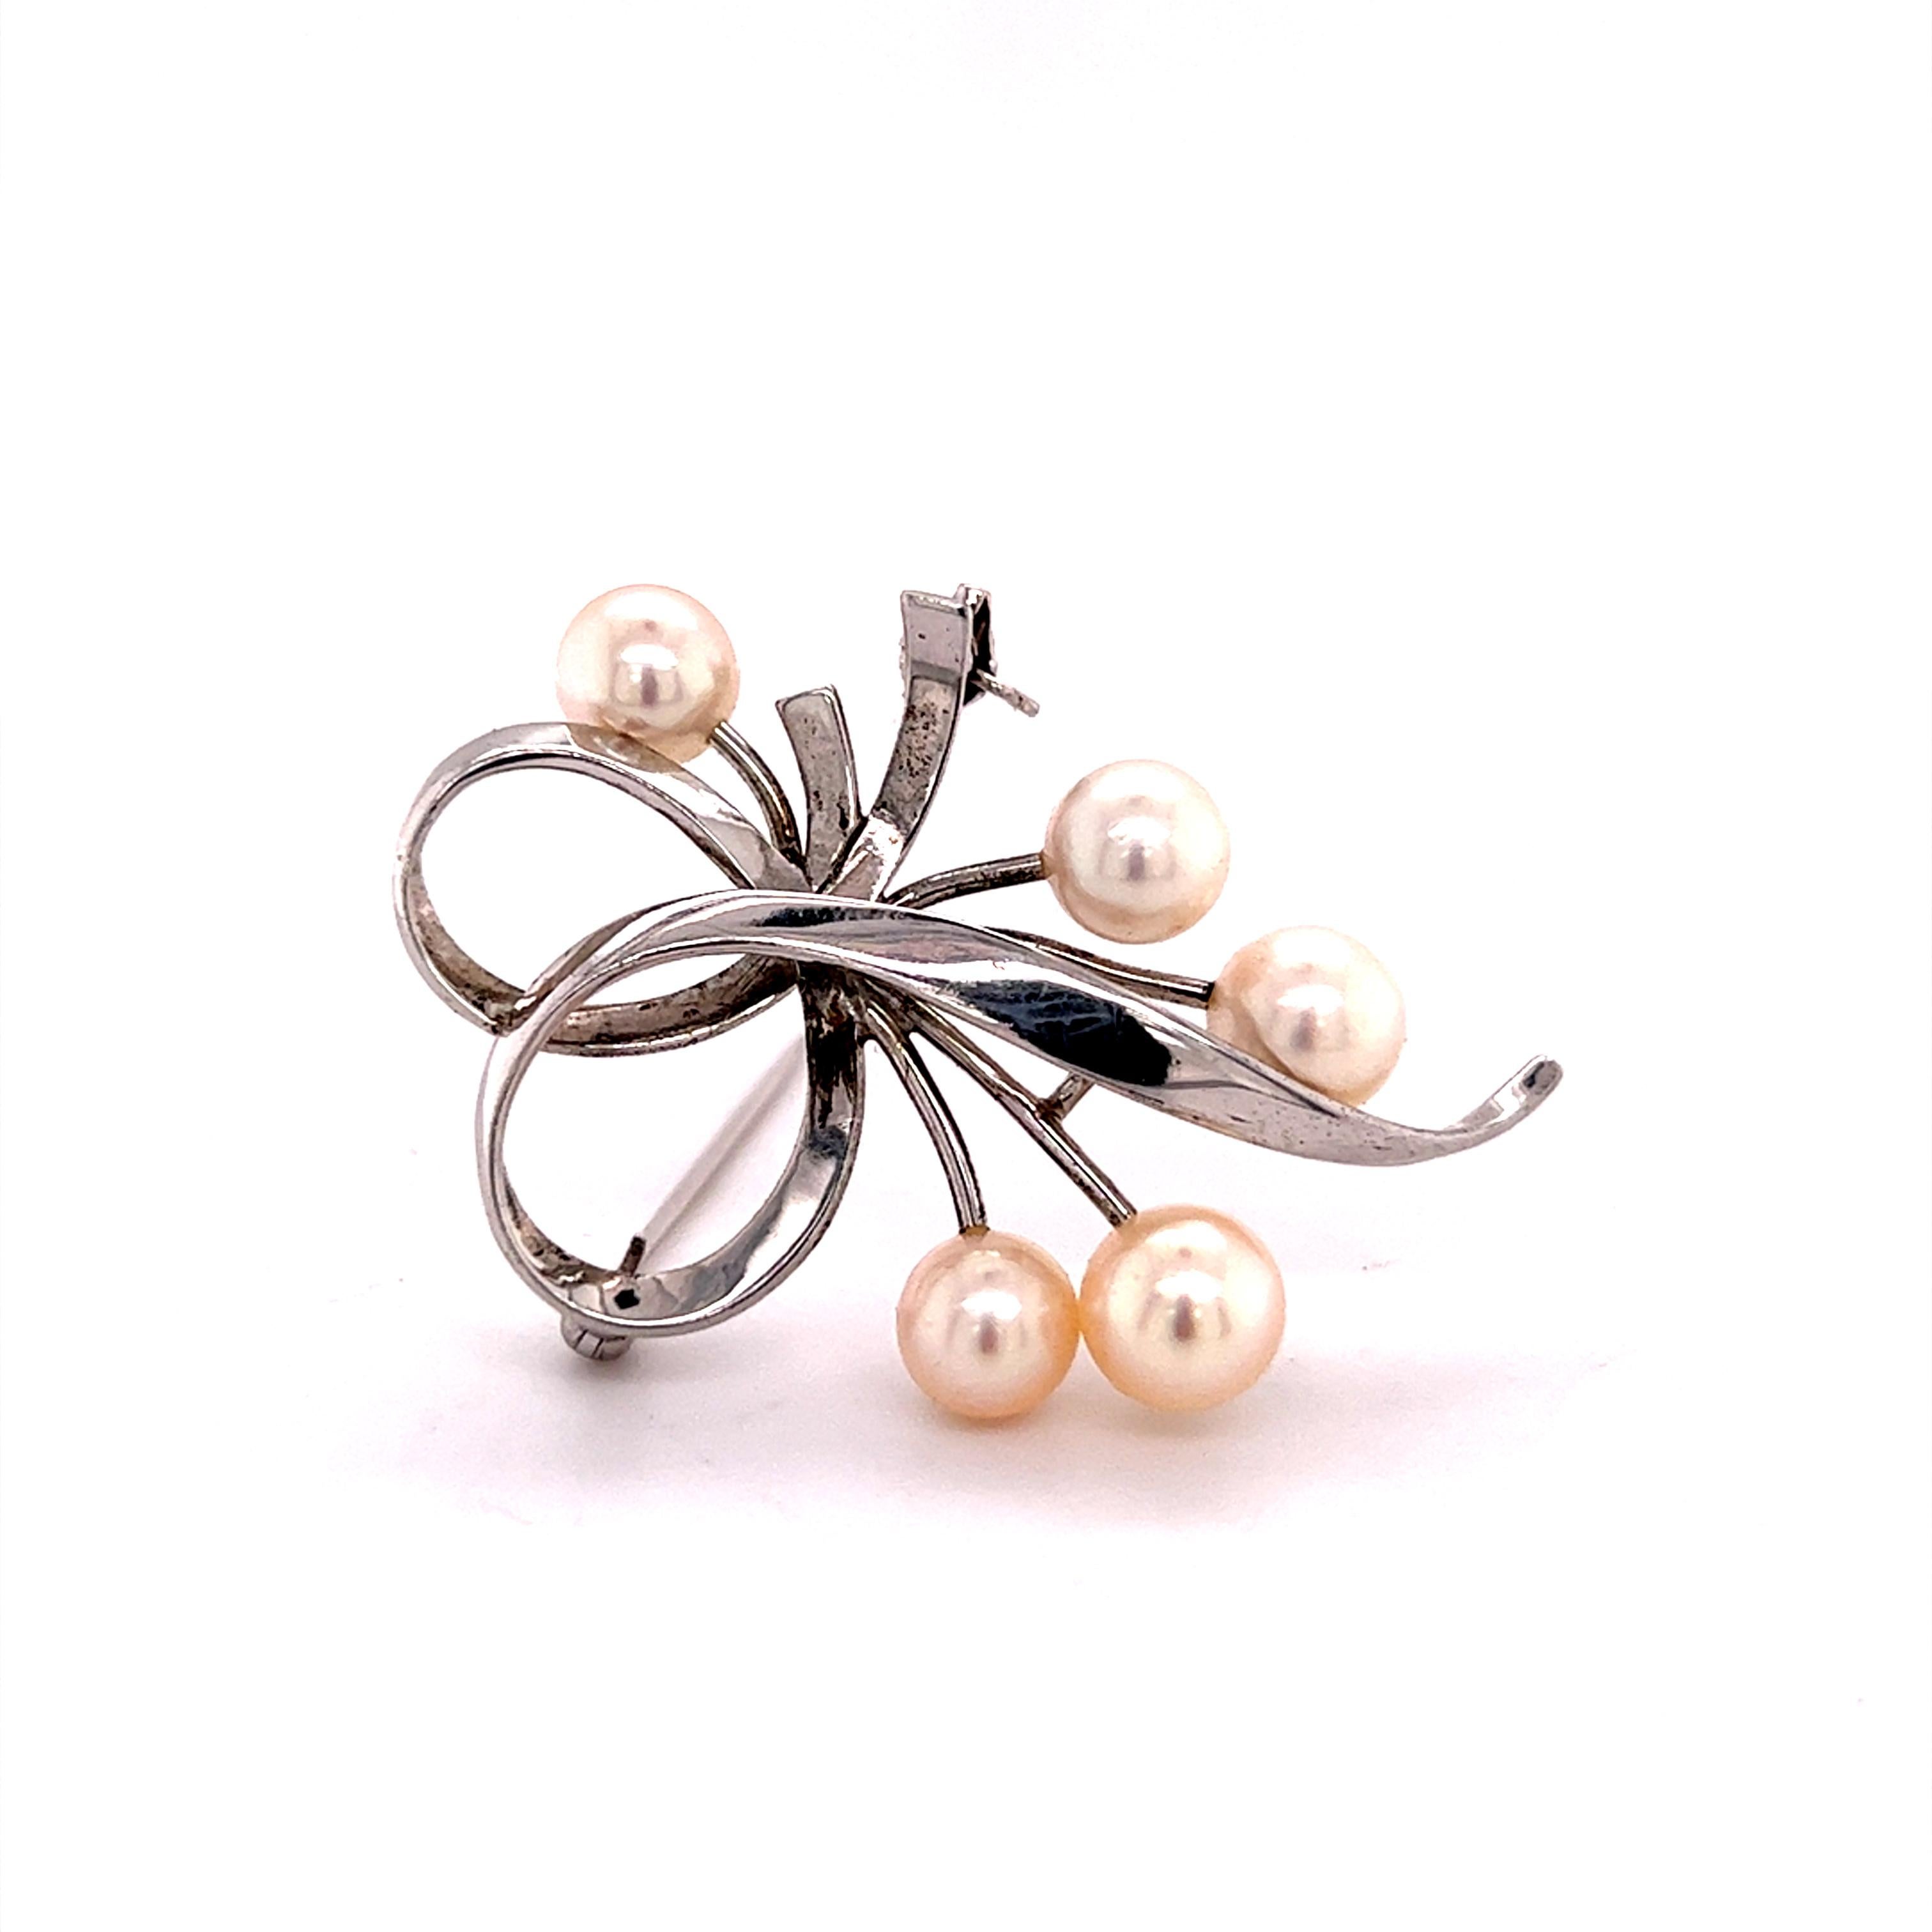 Mikimoto Estate Akoya Pearl Brooch Sterling Silver 6.6 mm 5.2 Grams For Sale 5